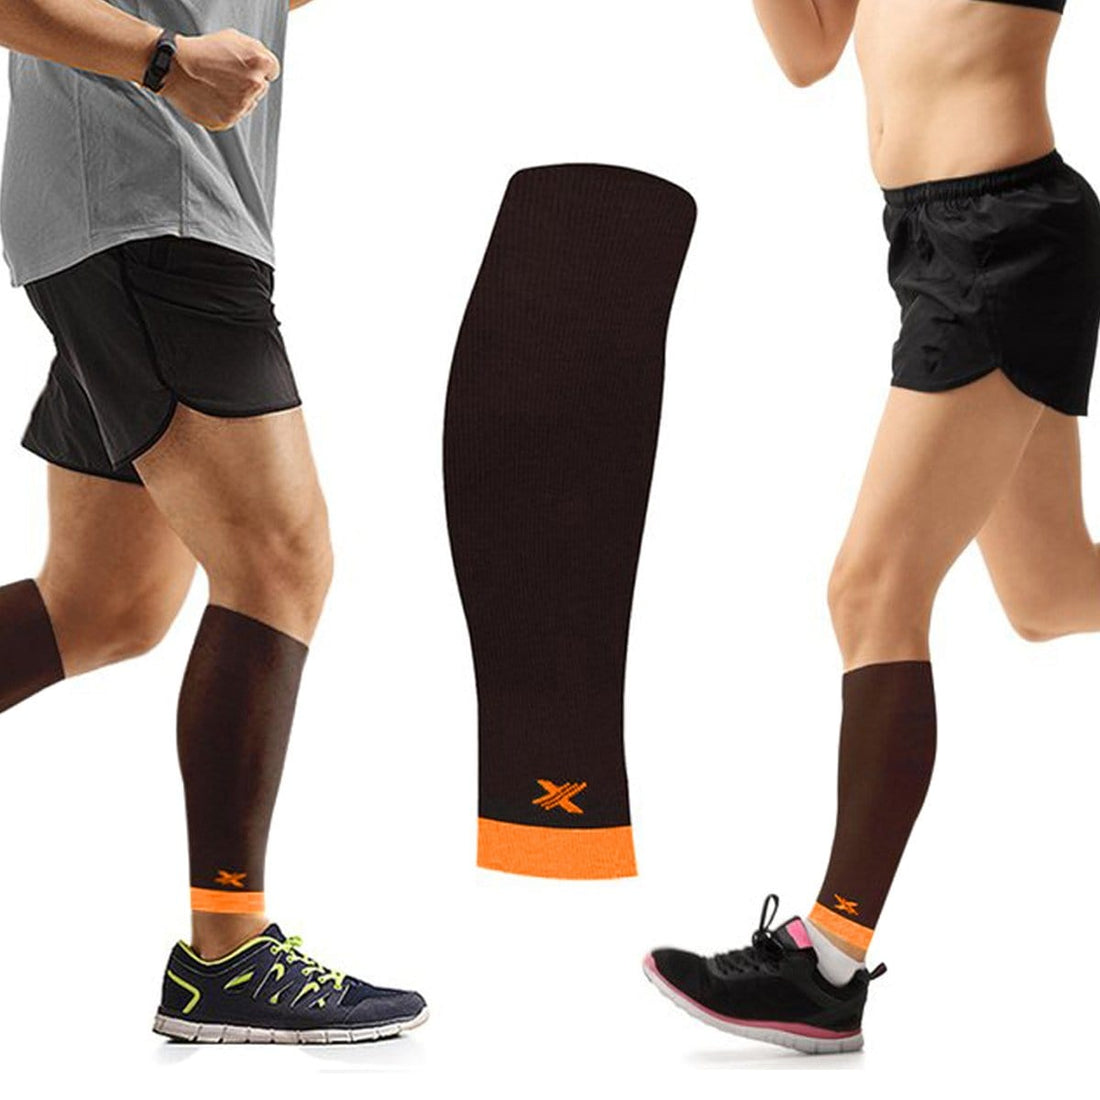 Calf Compression Sleeves – Extreme Fit